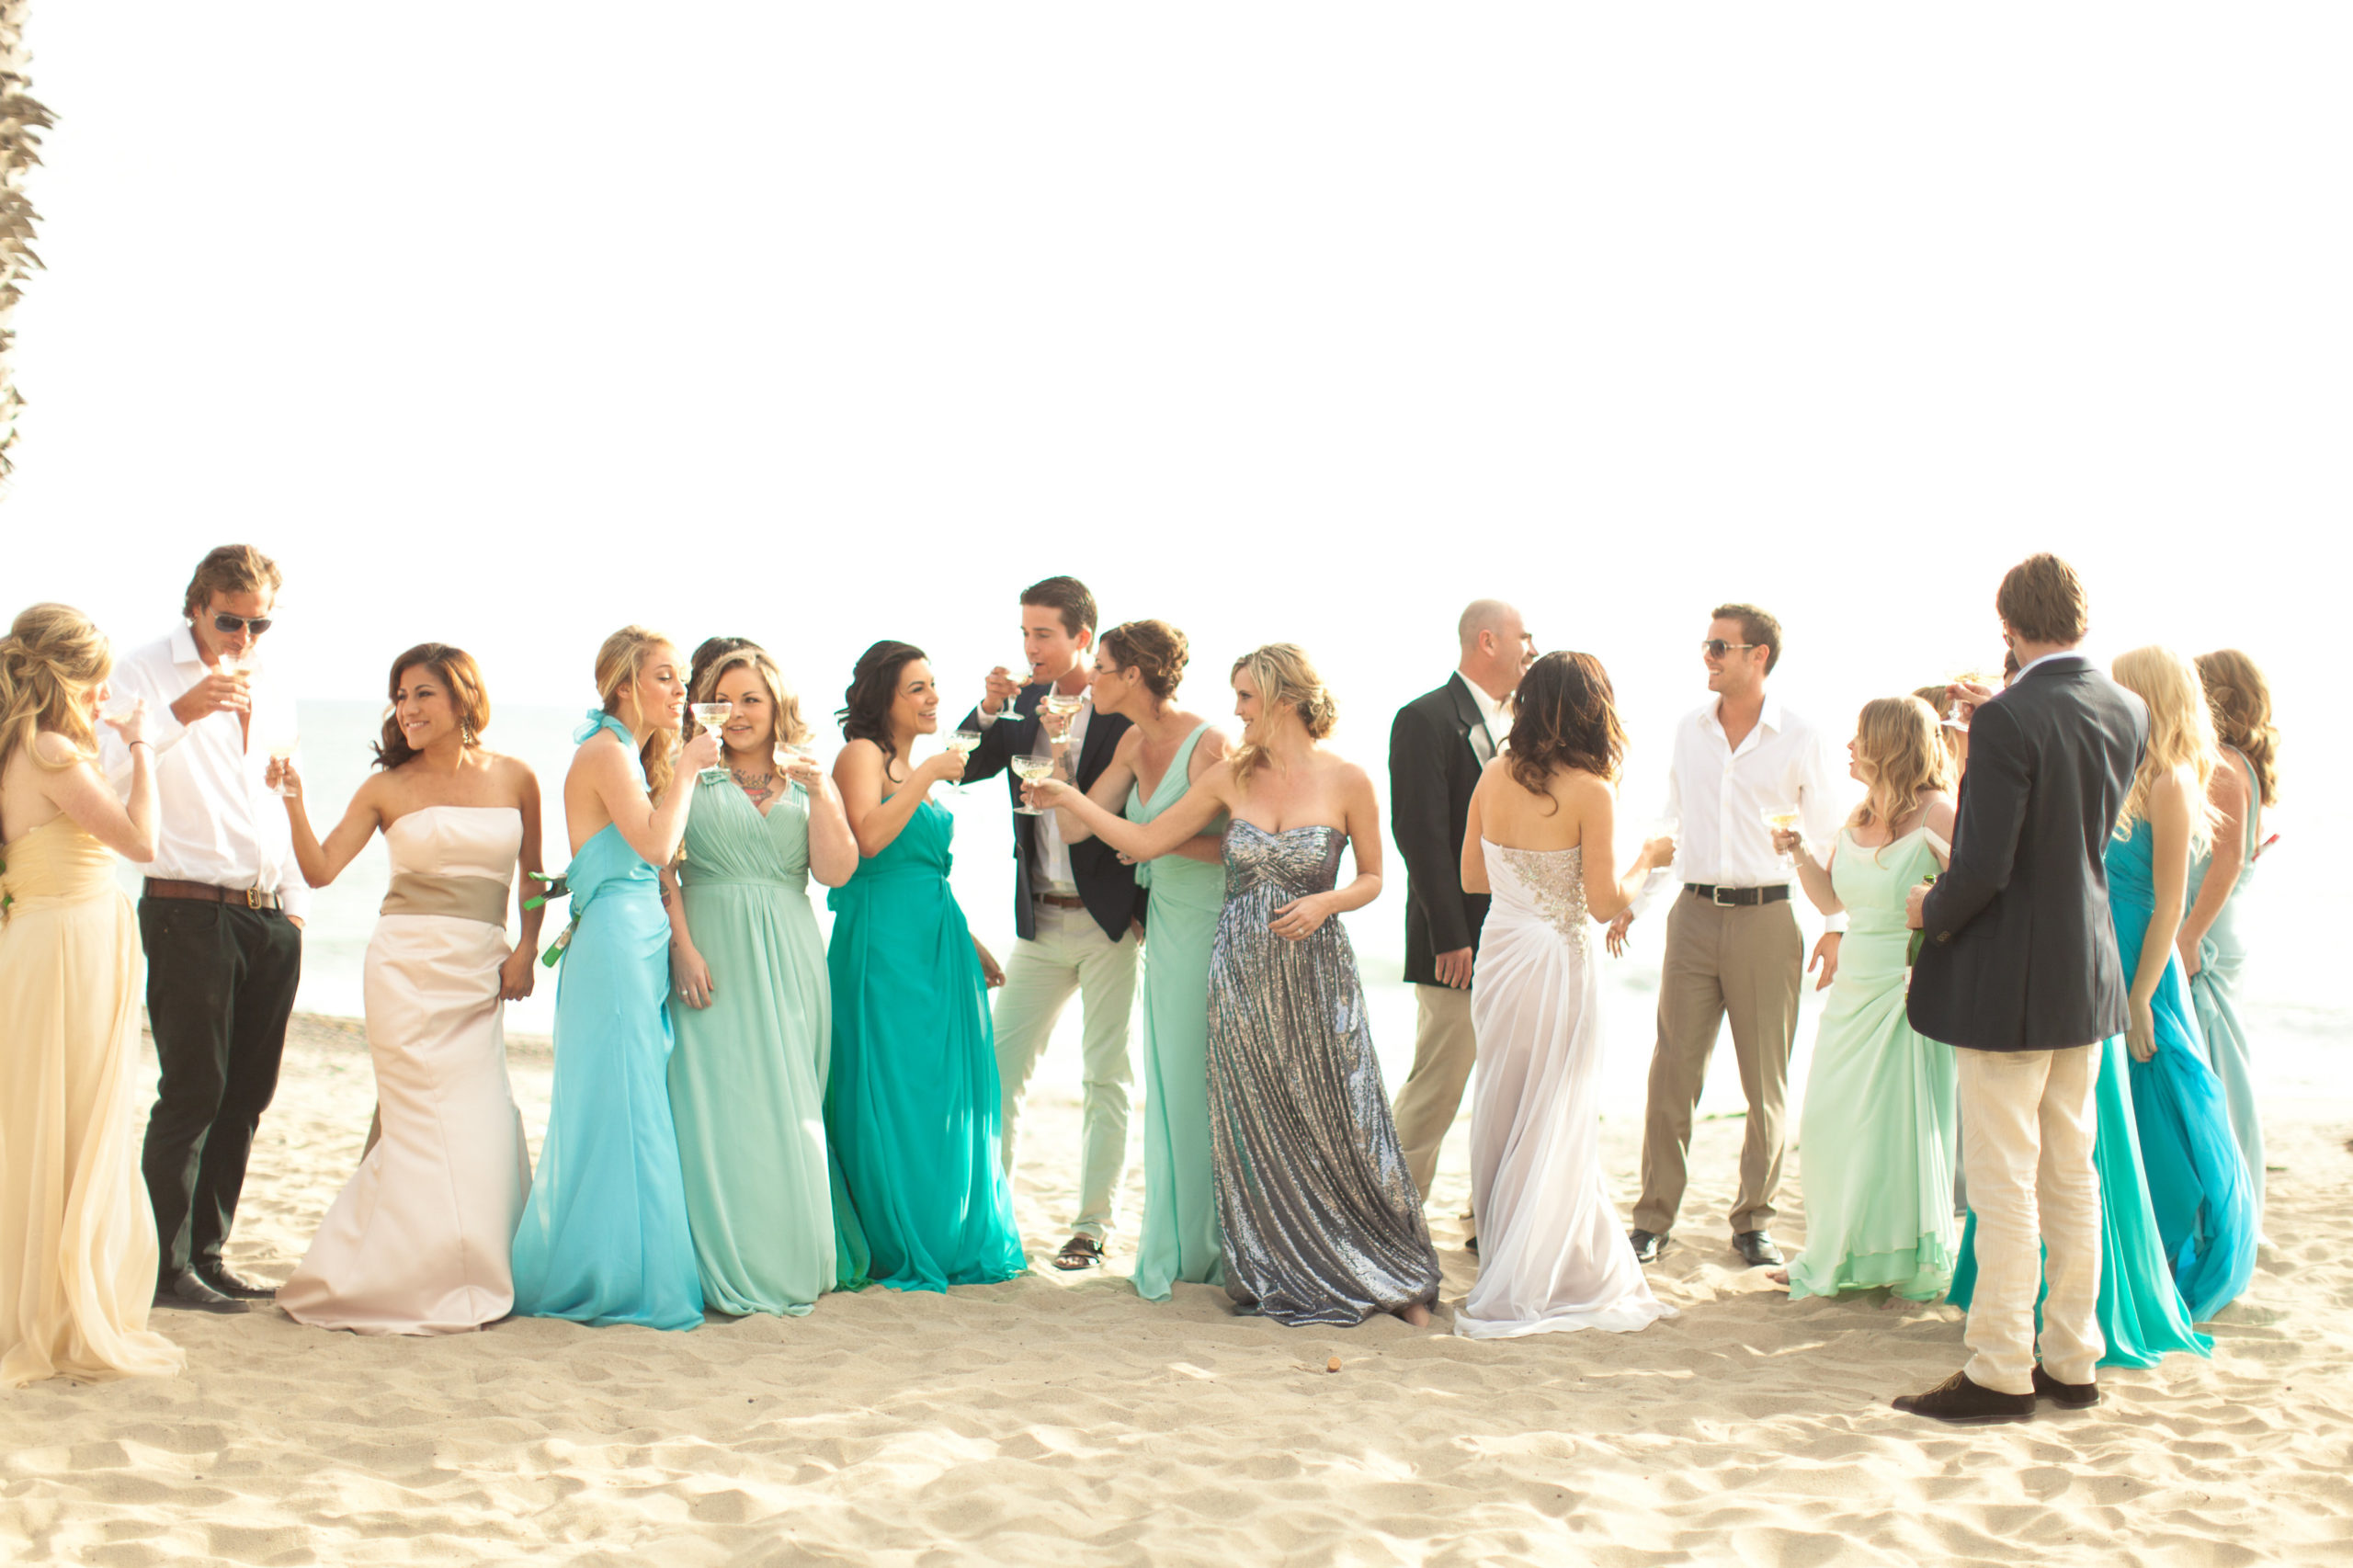 View More: http://chrisandkristenphotography.pass.us/archiverentals